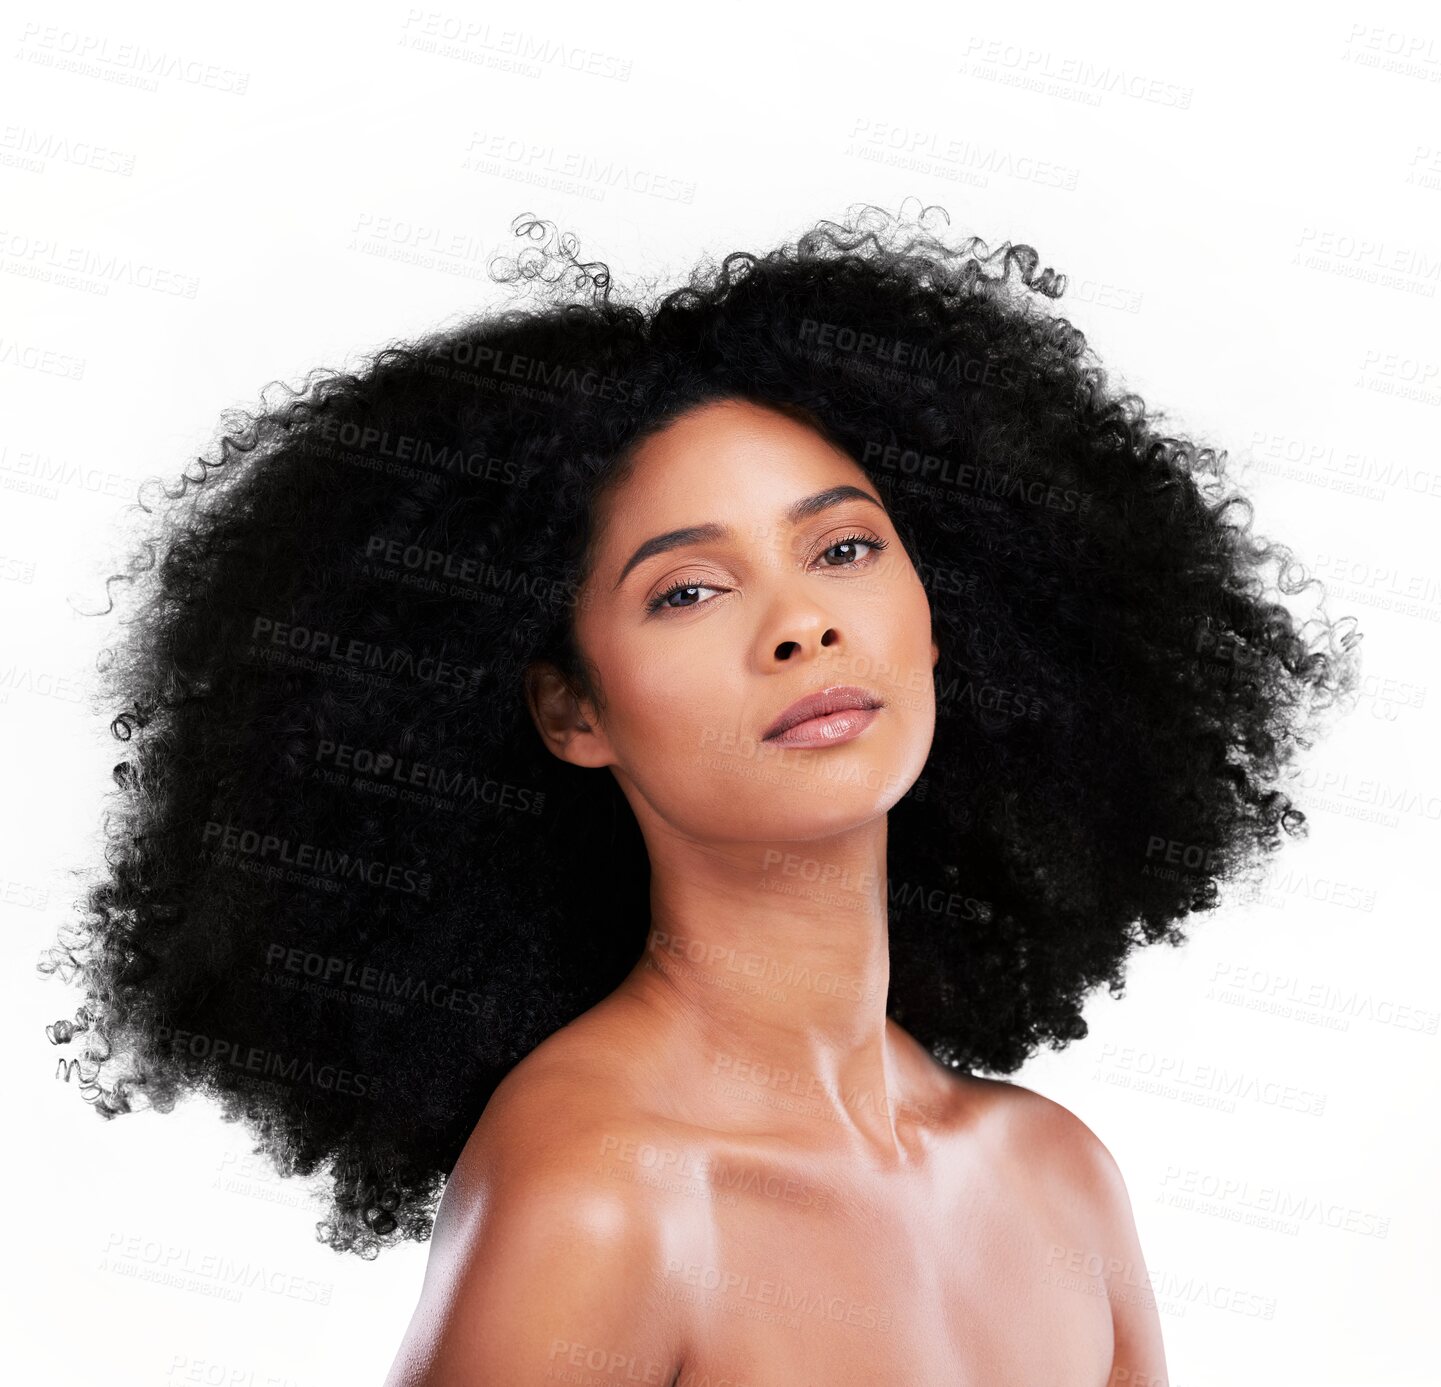 Buy stock photo Portrait, hair and afro with a natural black woman isolated on a transparent background for shampoo treatment. Face, salon and a confident young model on PNG for beauty, luxury or keratin haircare